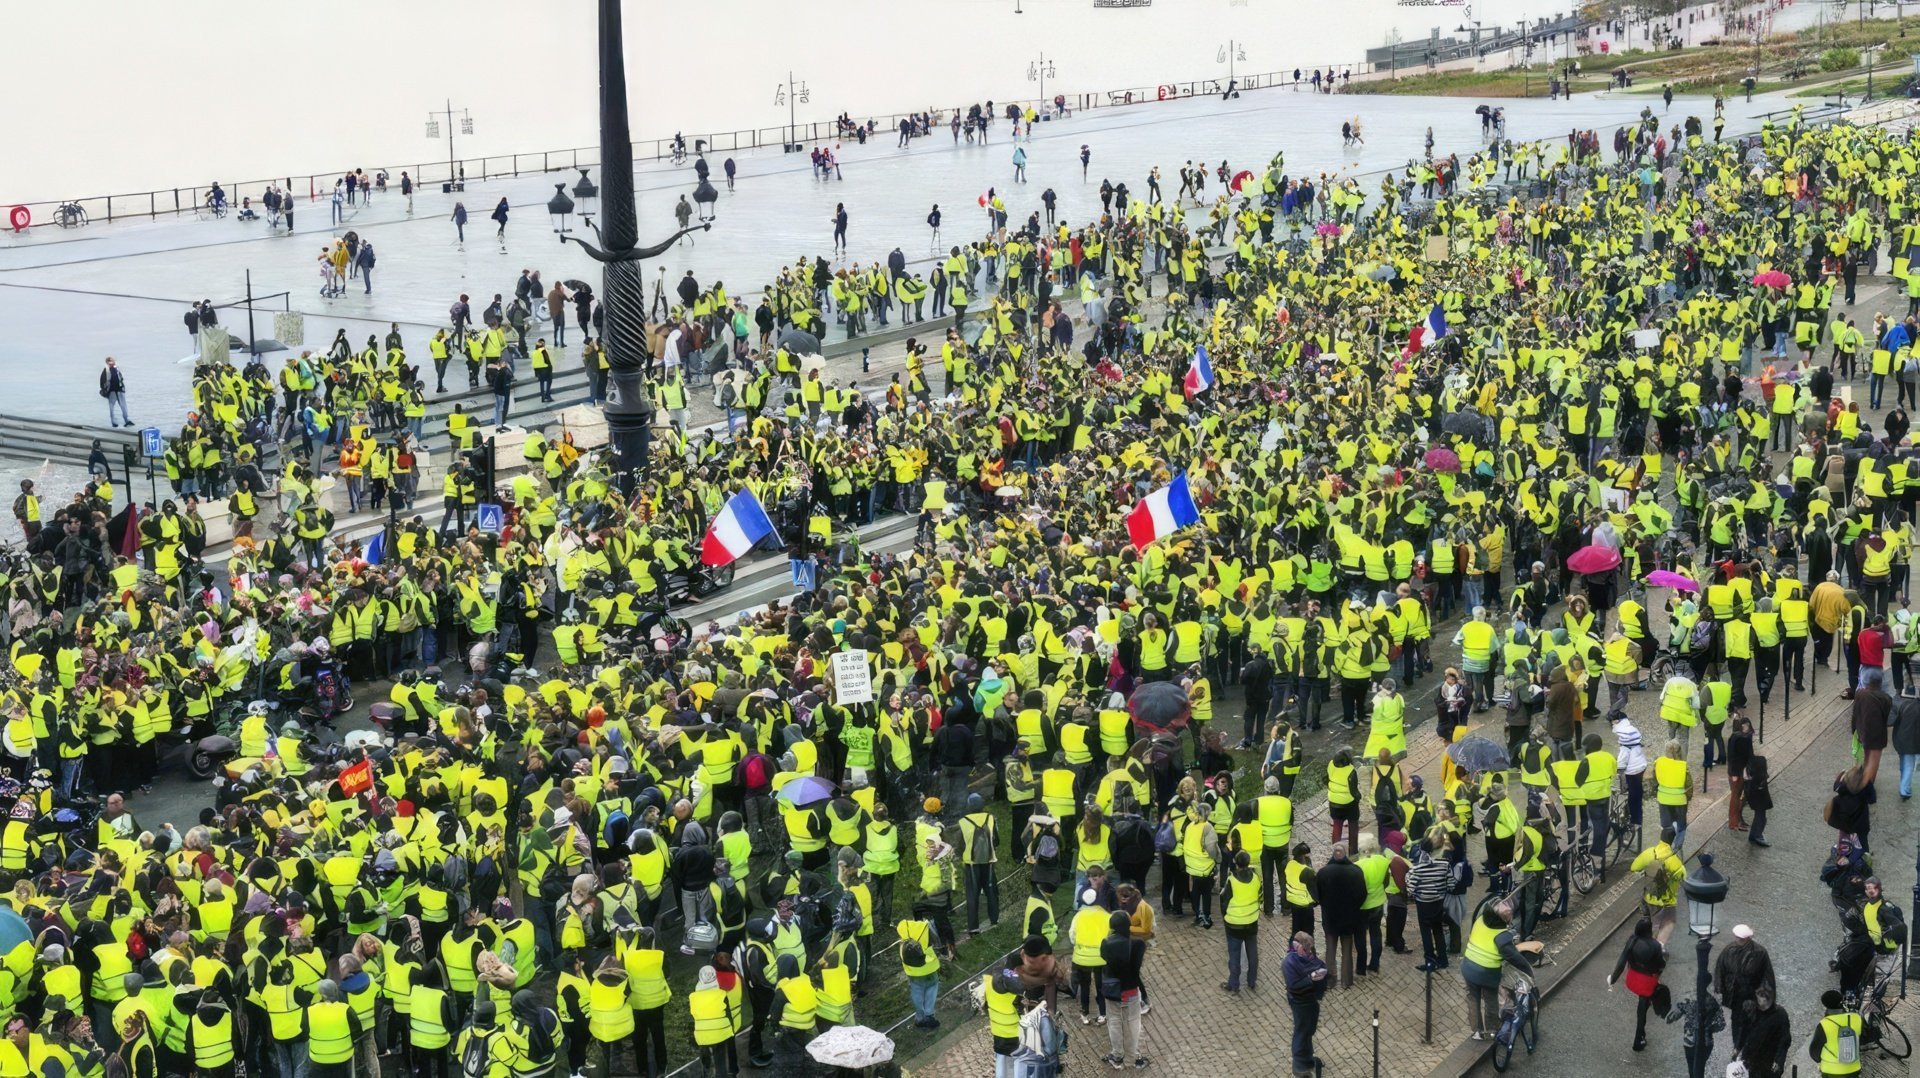 The yellow vests movement protests